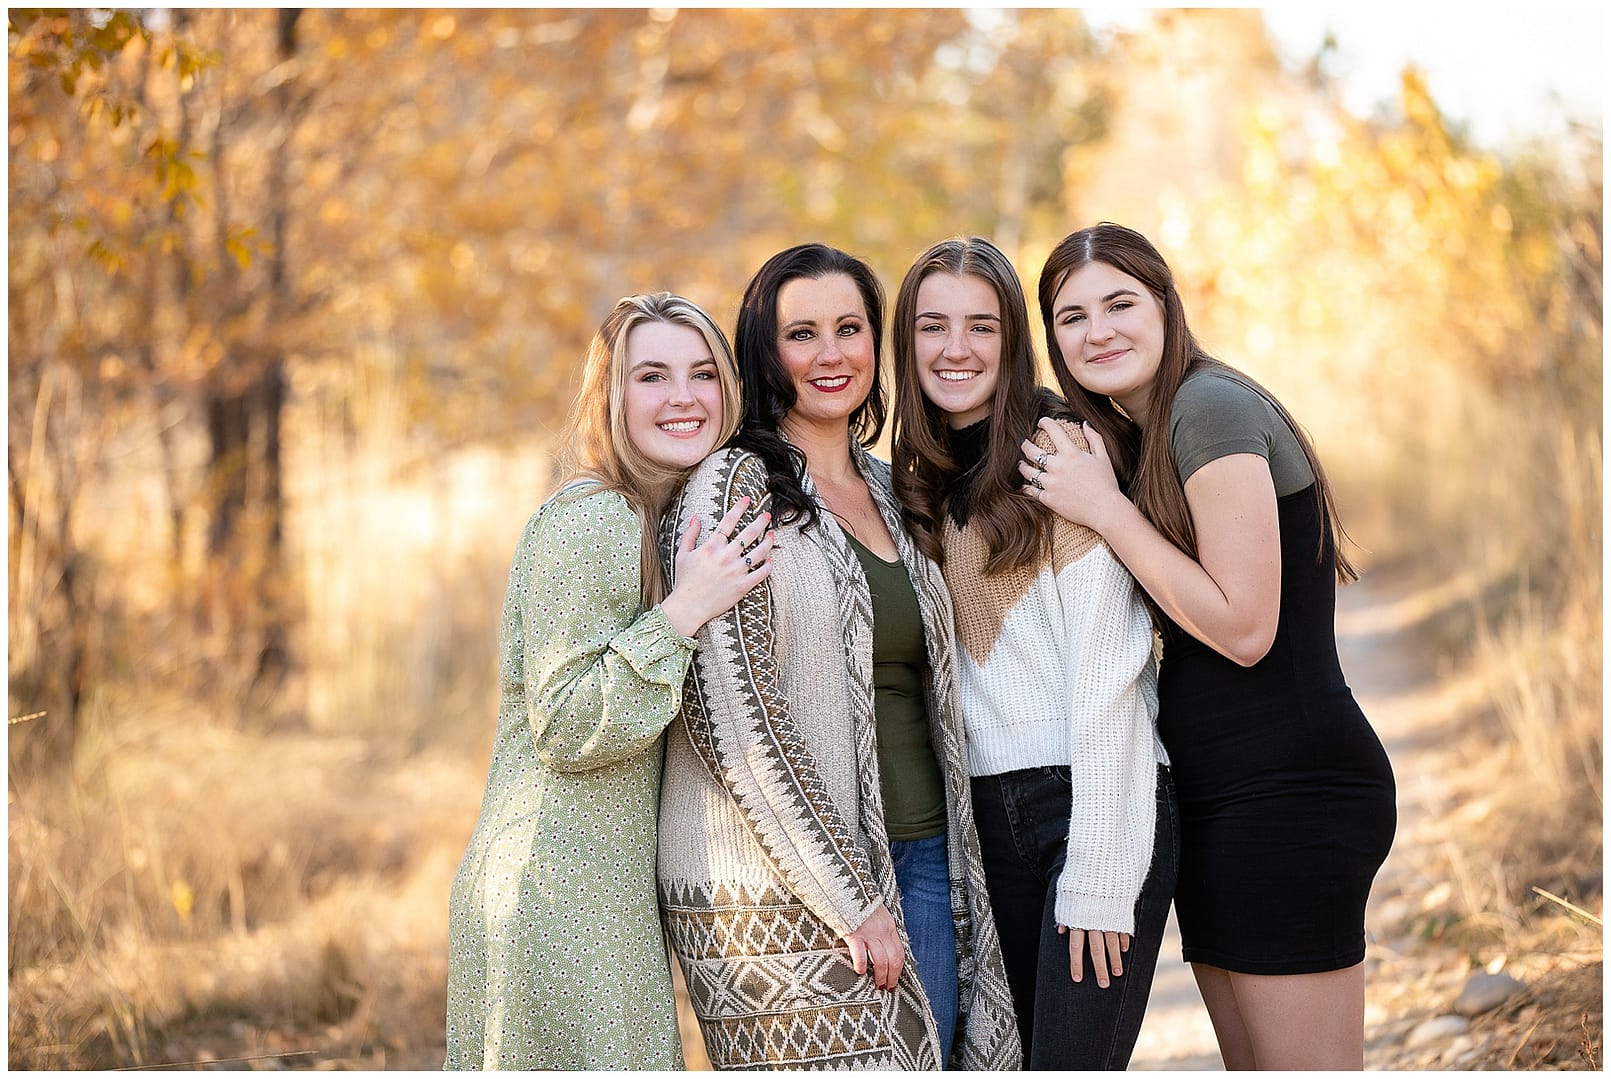 Mom with her three daughters in Boise,ID. Photo by Tiffany Hix Photography.